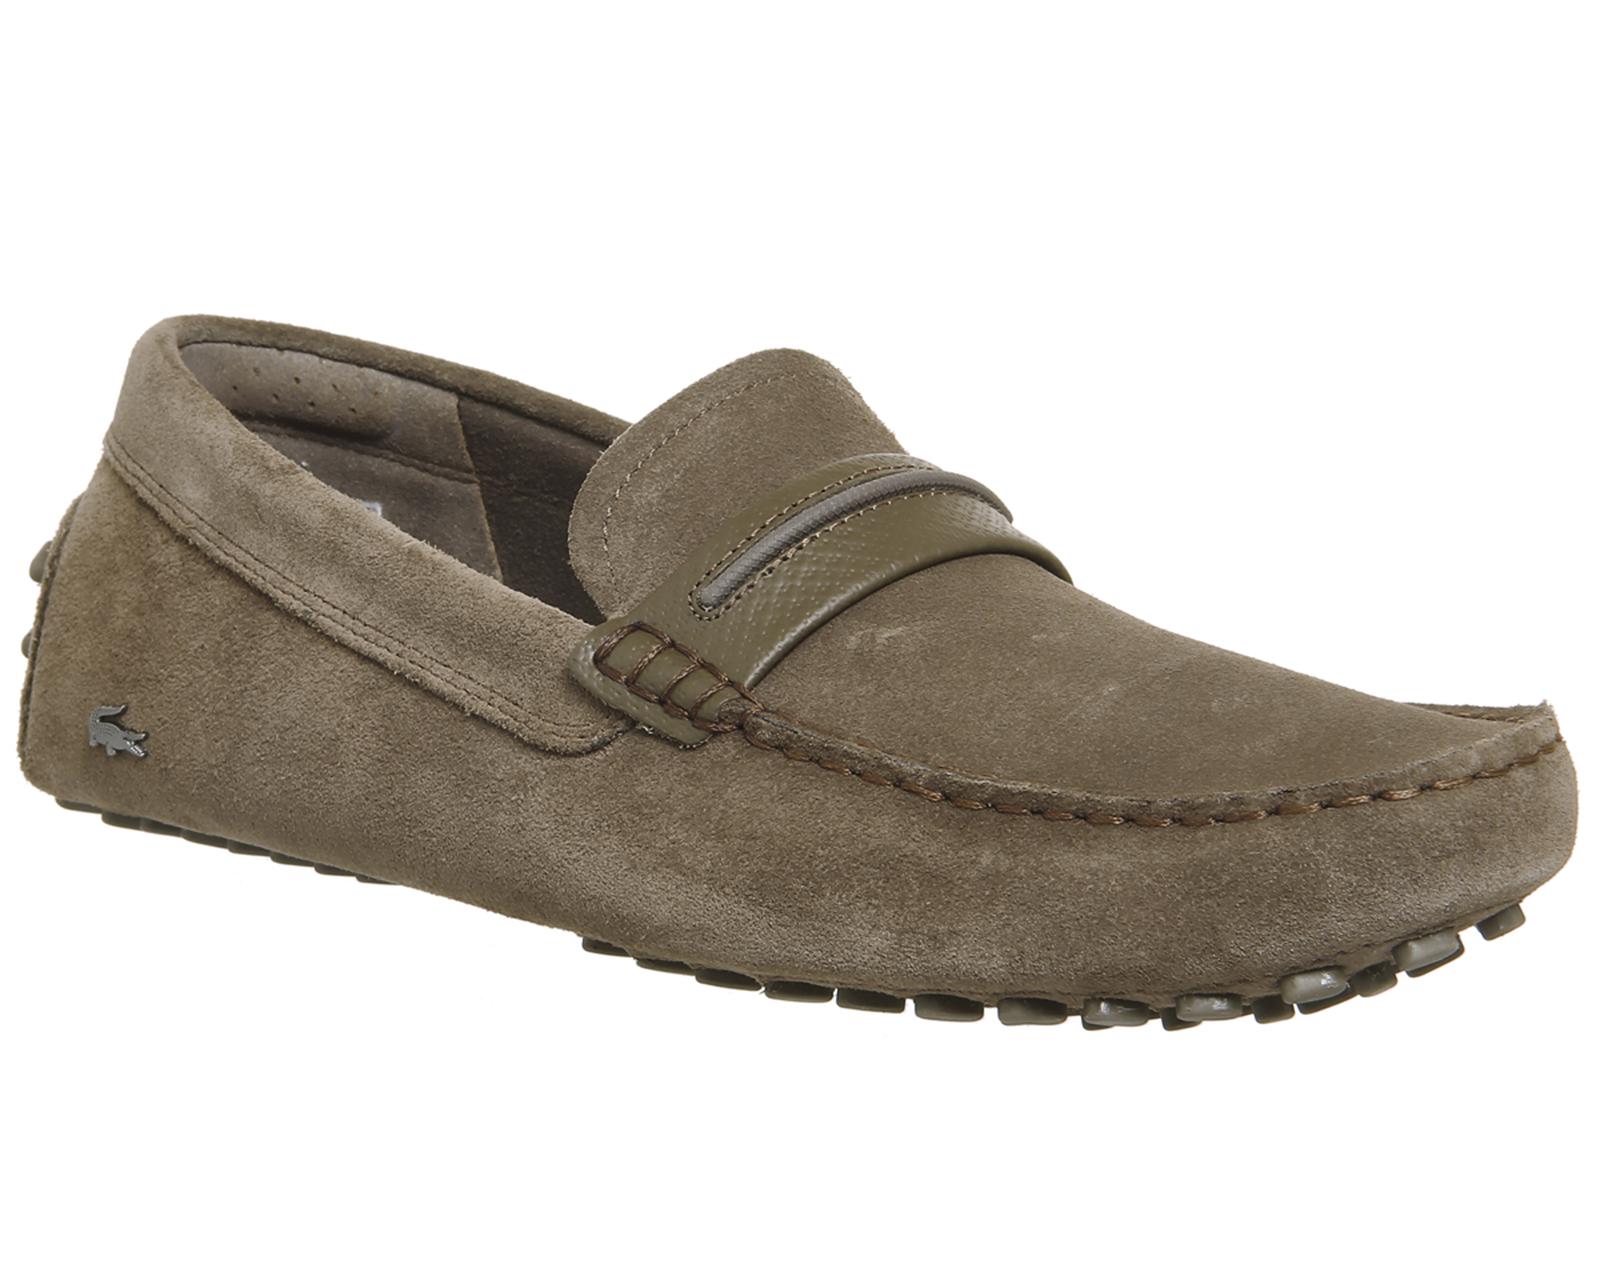 Lacoste Suede Herron Loafers in Brown for Men - Lyst